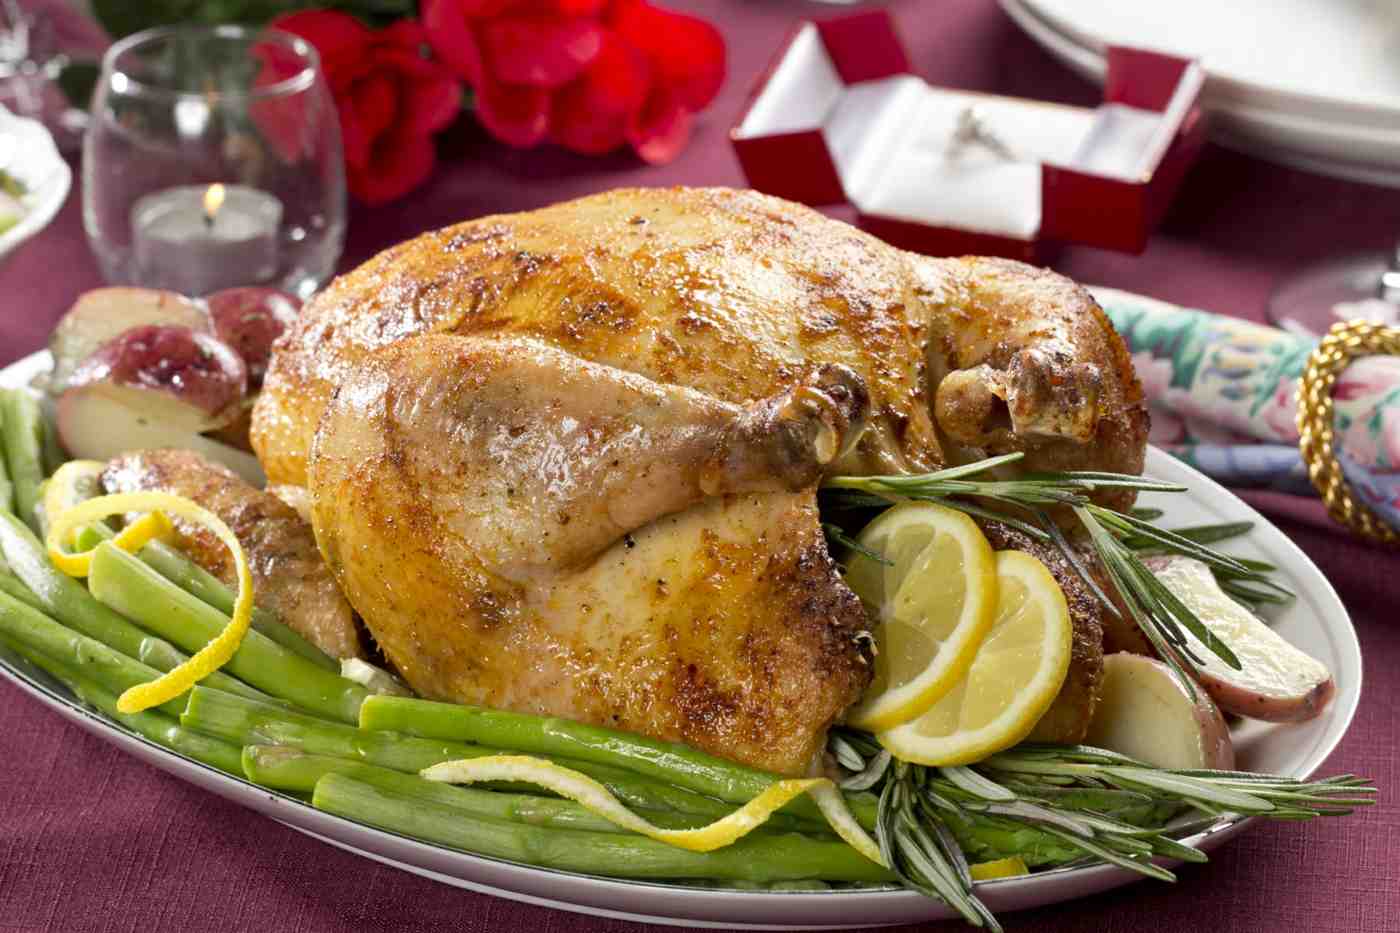 Rosemary, Thyme, Sage and Parsley are suitable spices for the chicken with asparagus